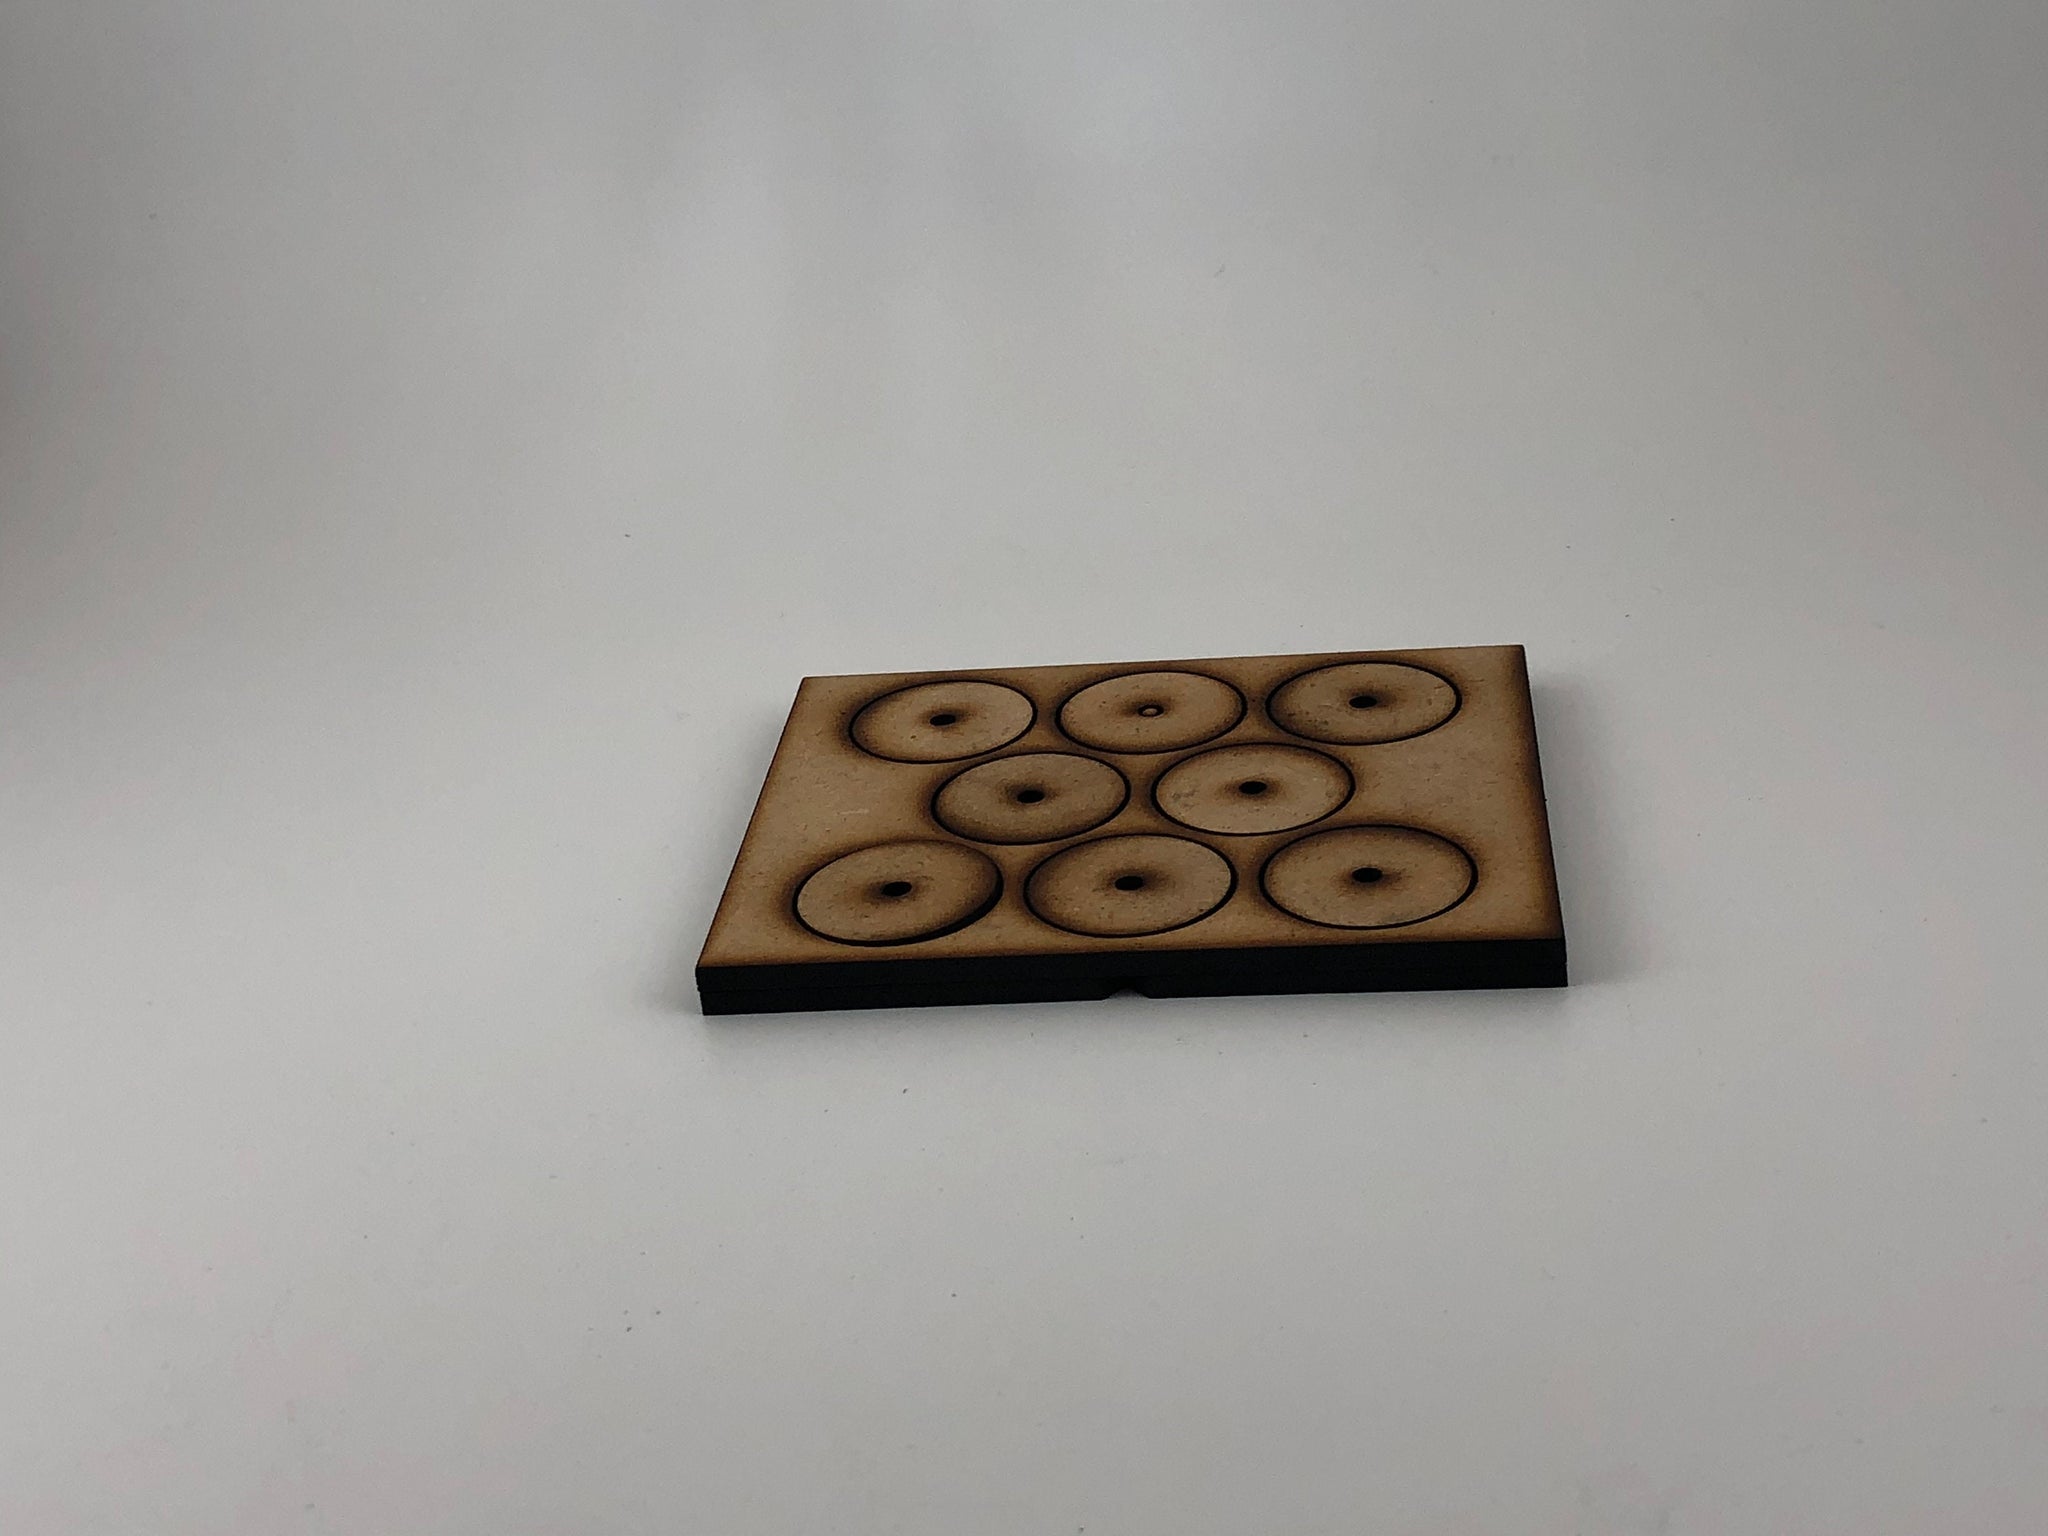 100mm x 80mm movement tray for 25mm round bases.